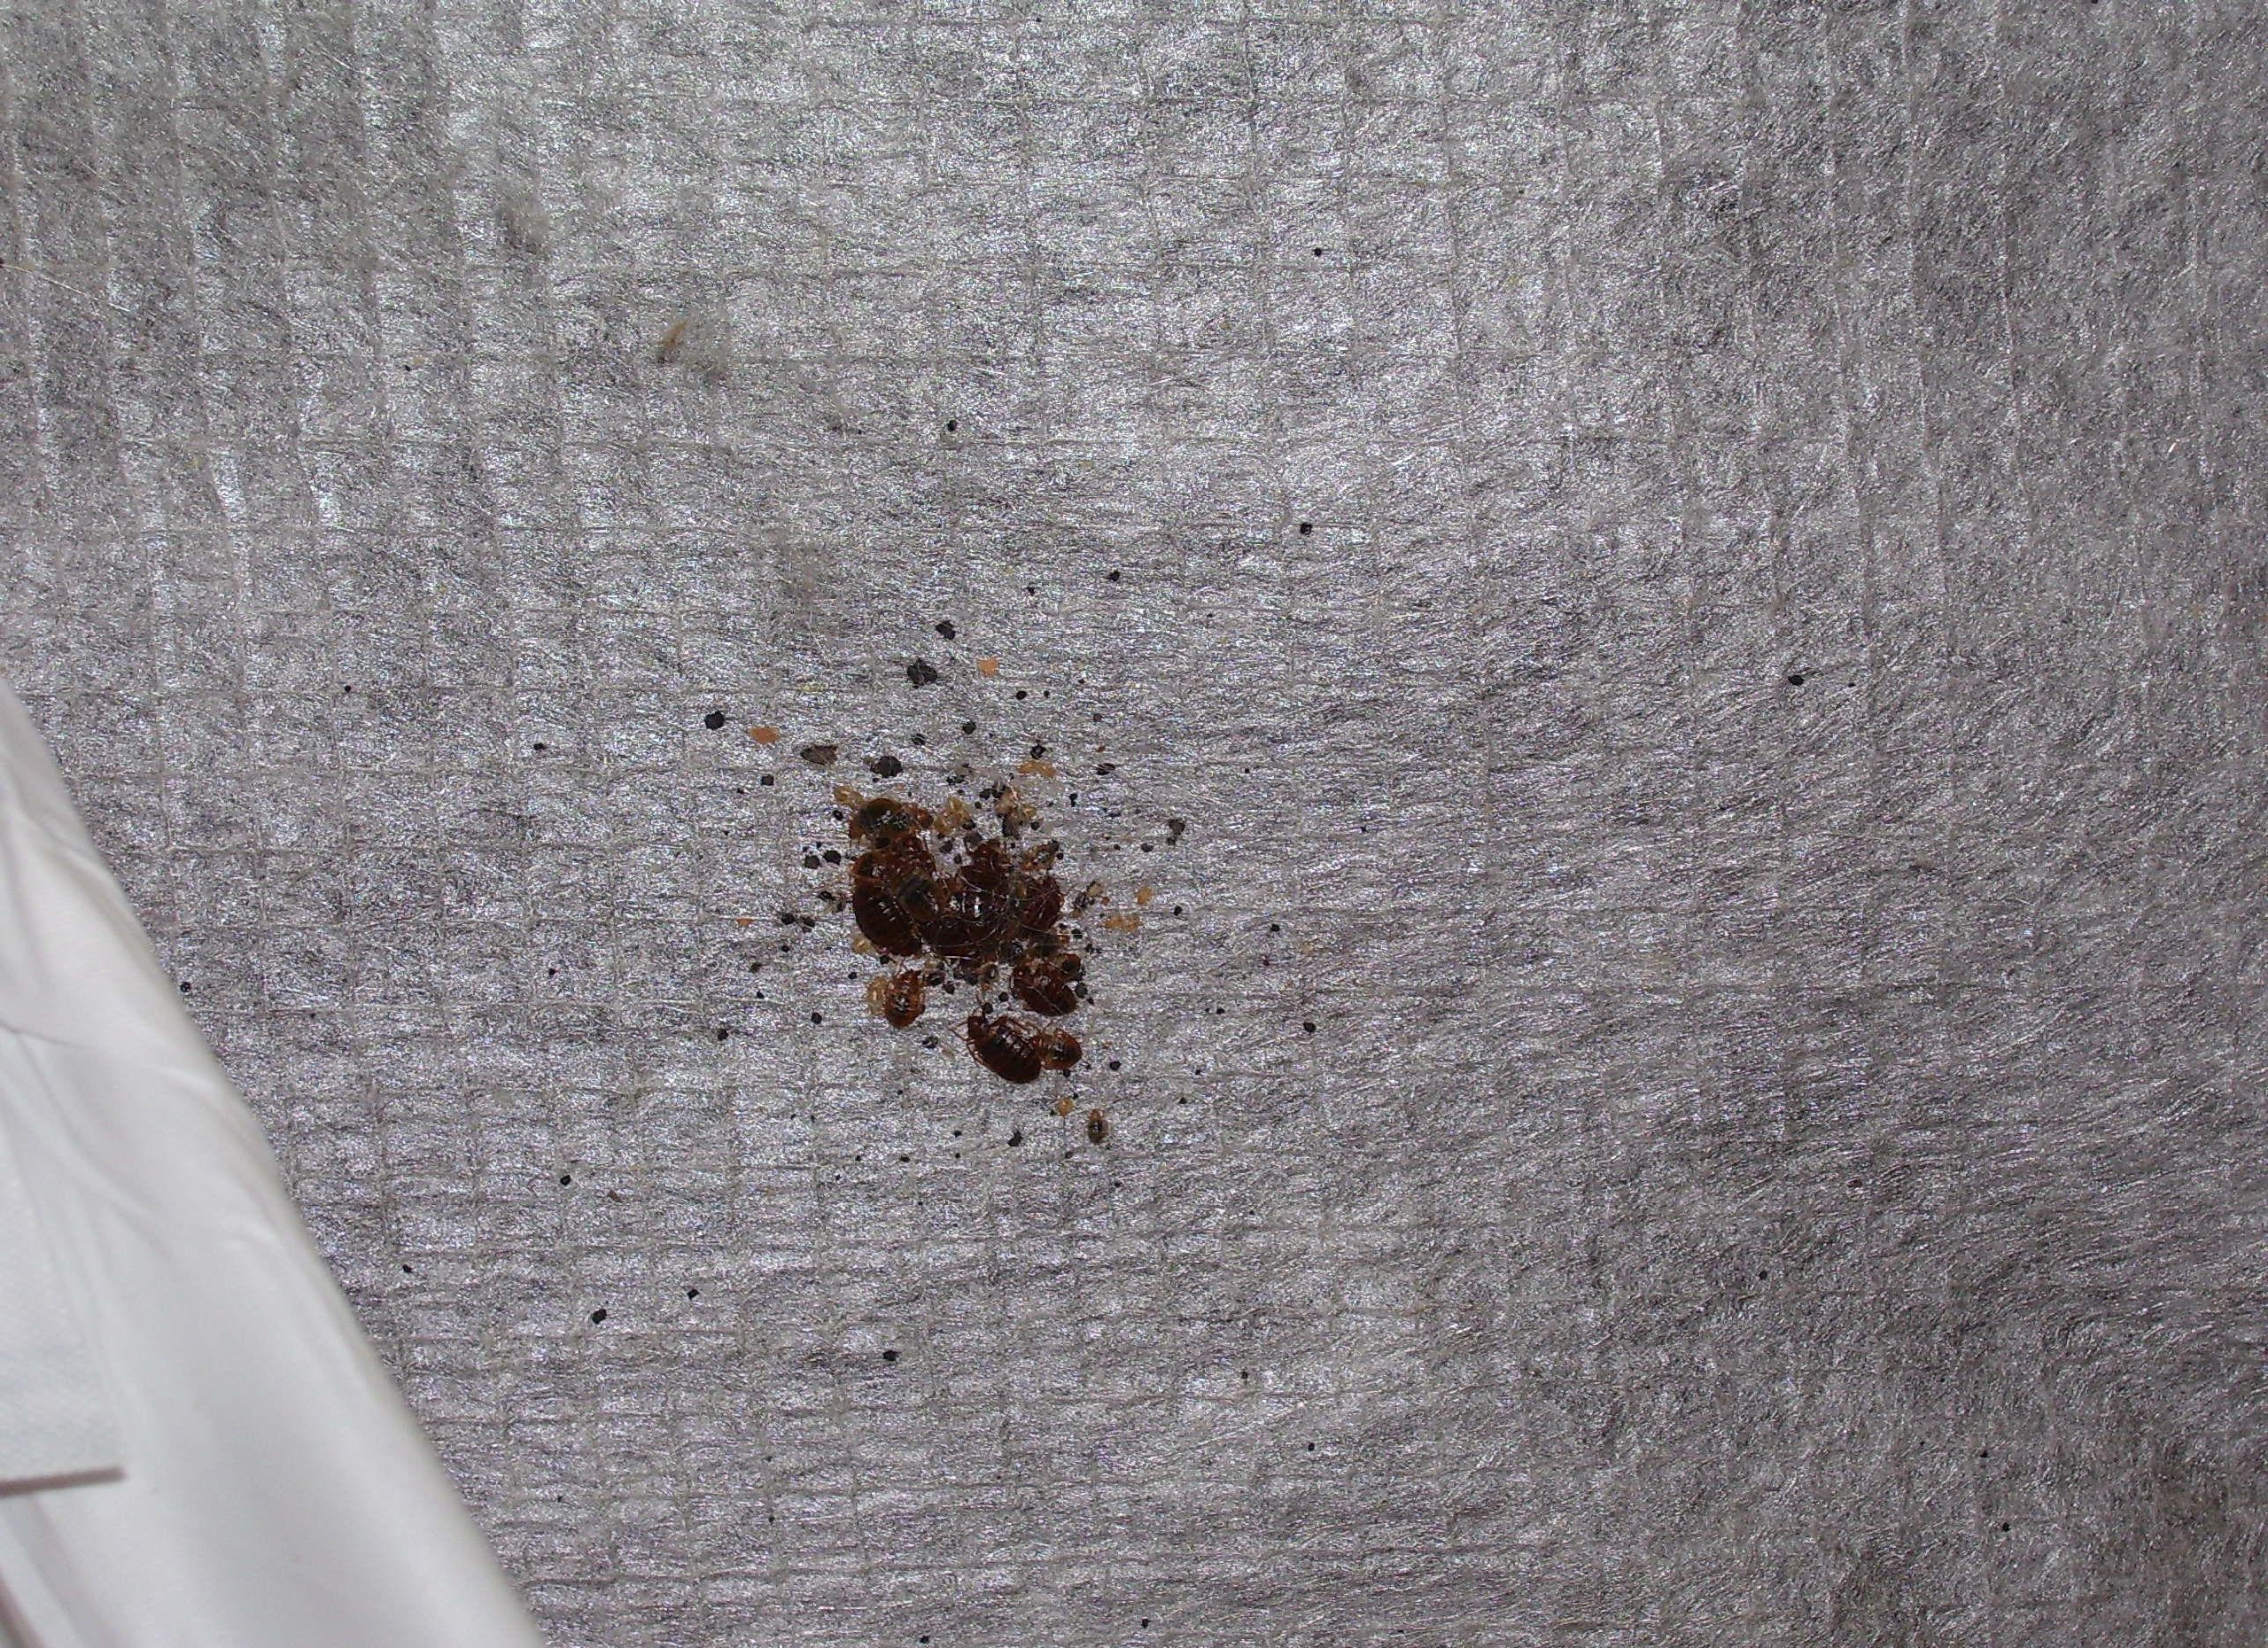 How to Detect Bed Bugs